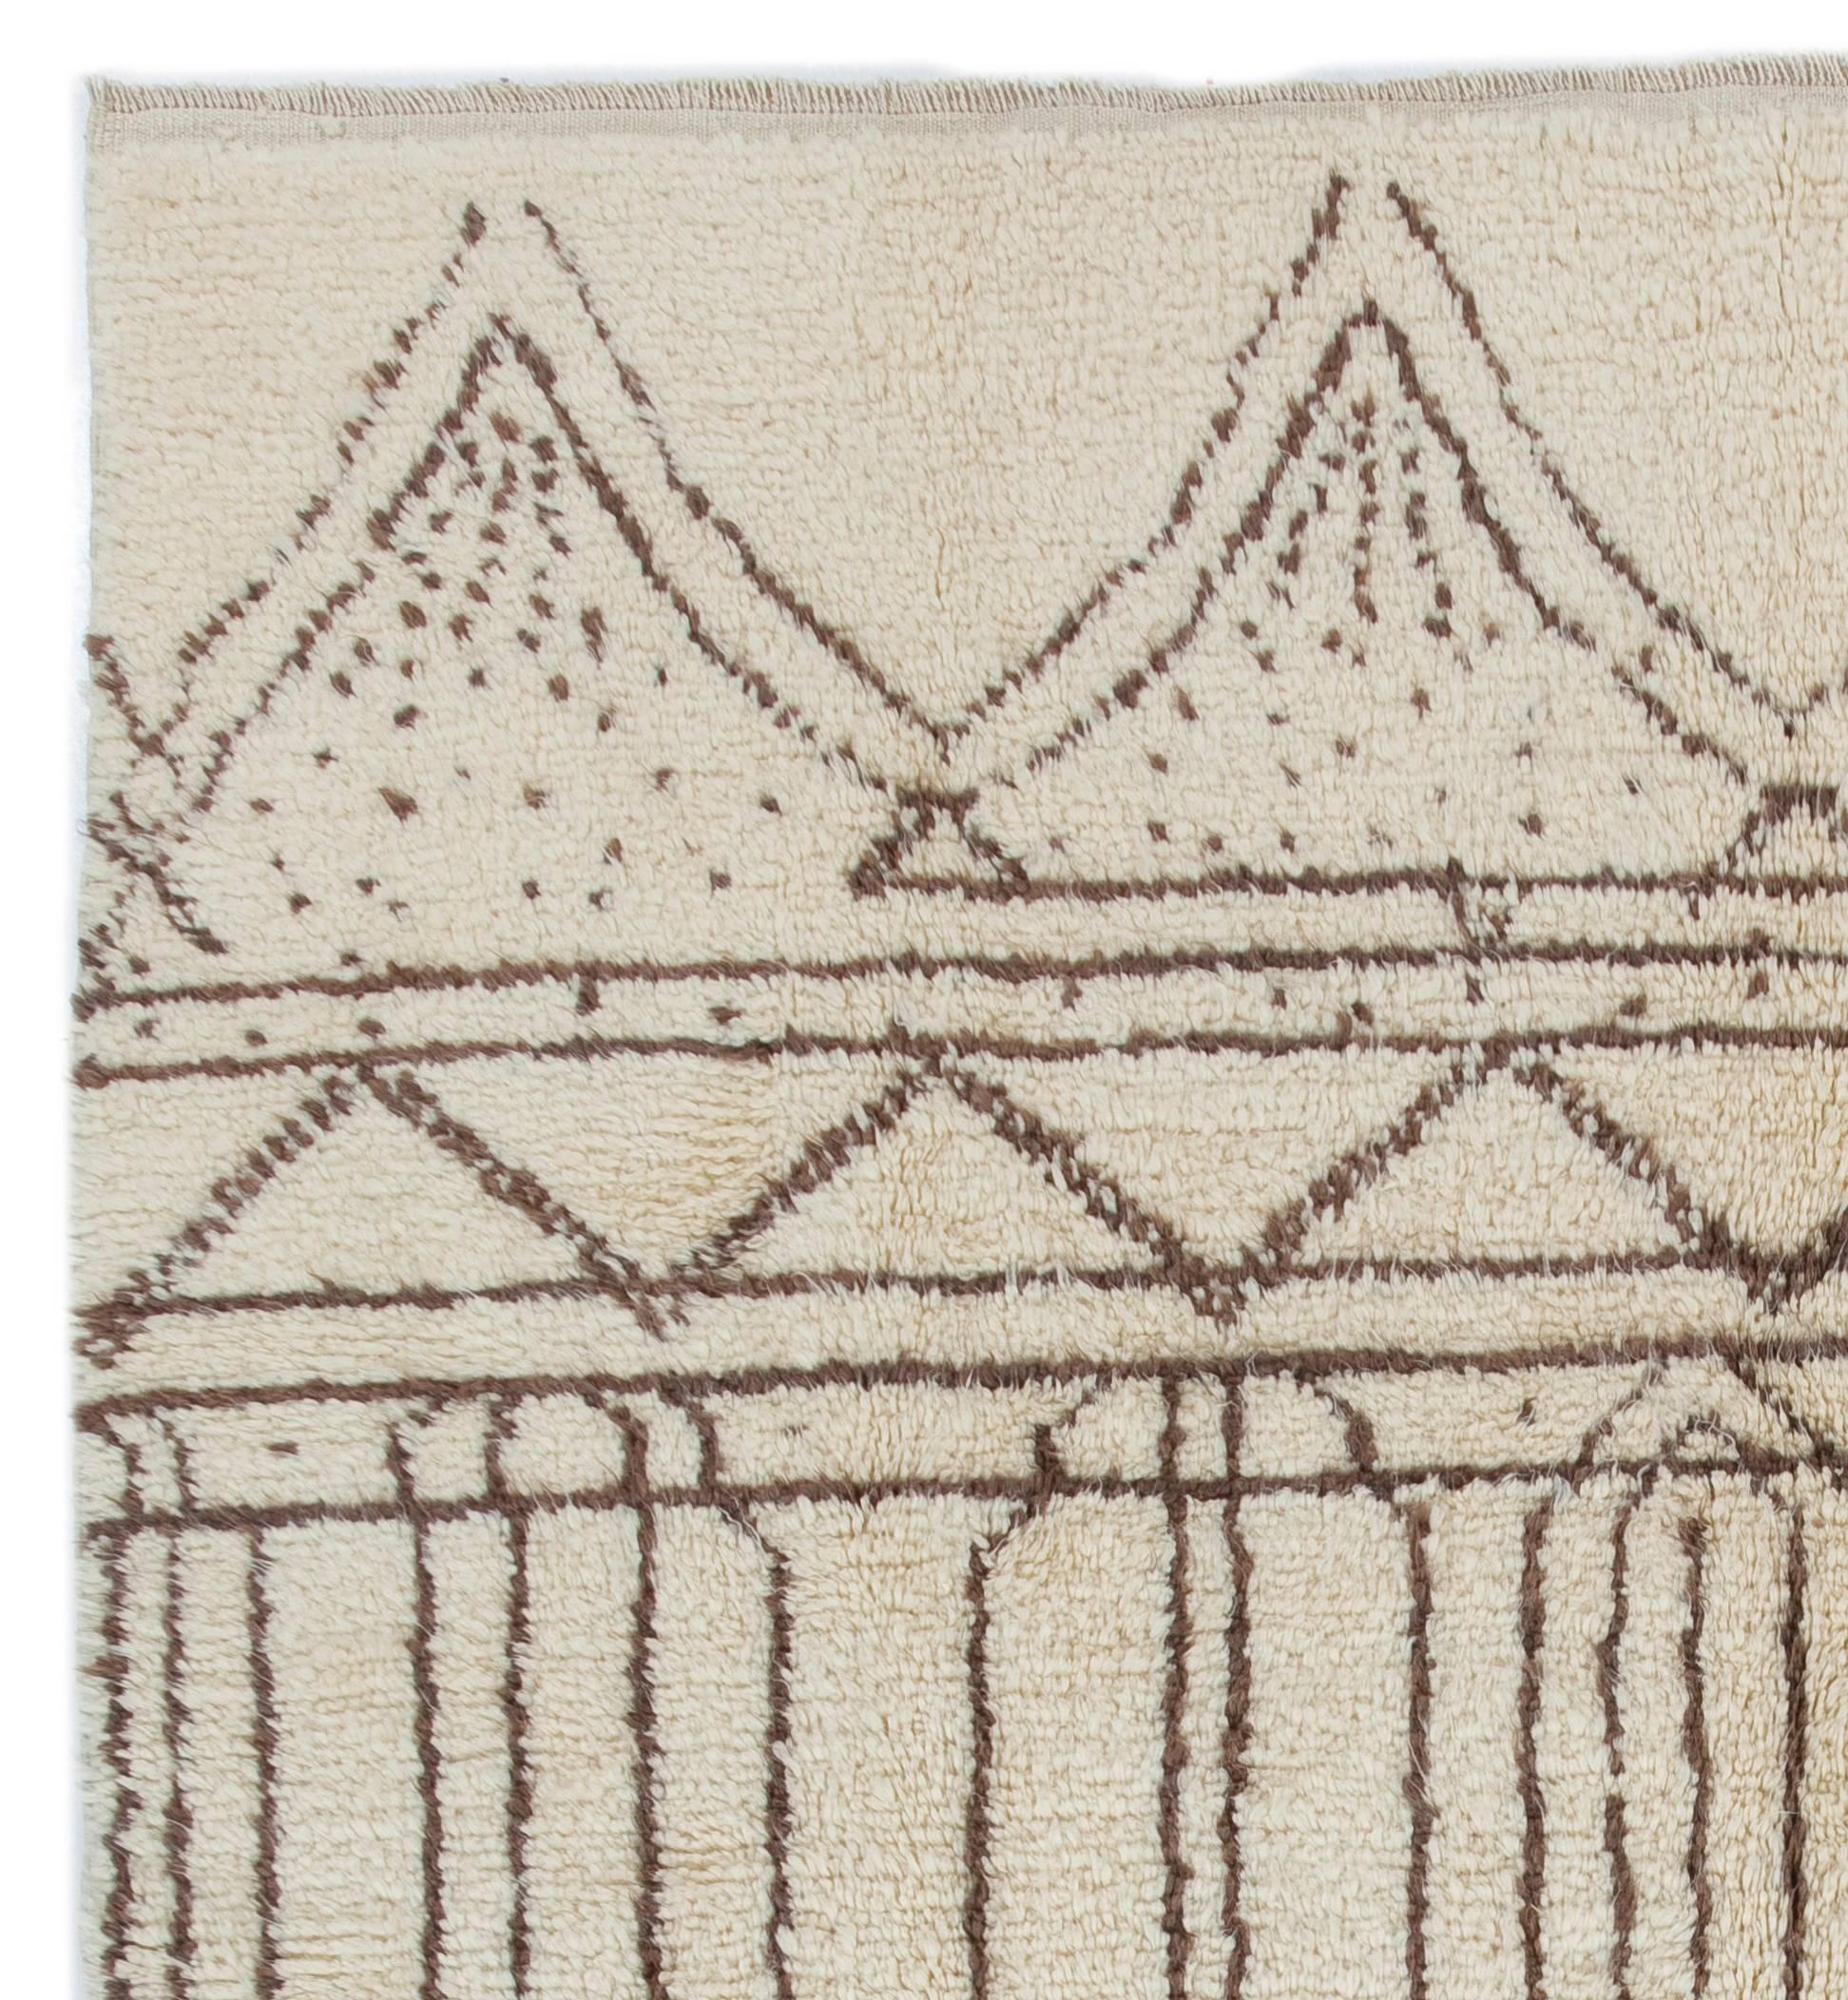 A contemporary hand-knotted Moroccan rug, made of natural un-dyed ivory and light brown sheep wool. 

100% Natural Hand-Spun Wool of finest quality.

These hand-knotted rugs are produced from scratch in our atelier located in Central Anatolia,